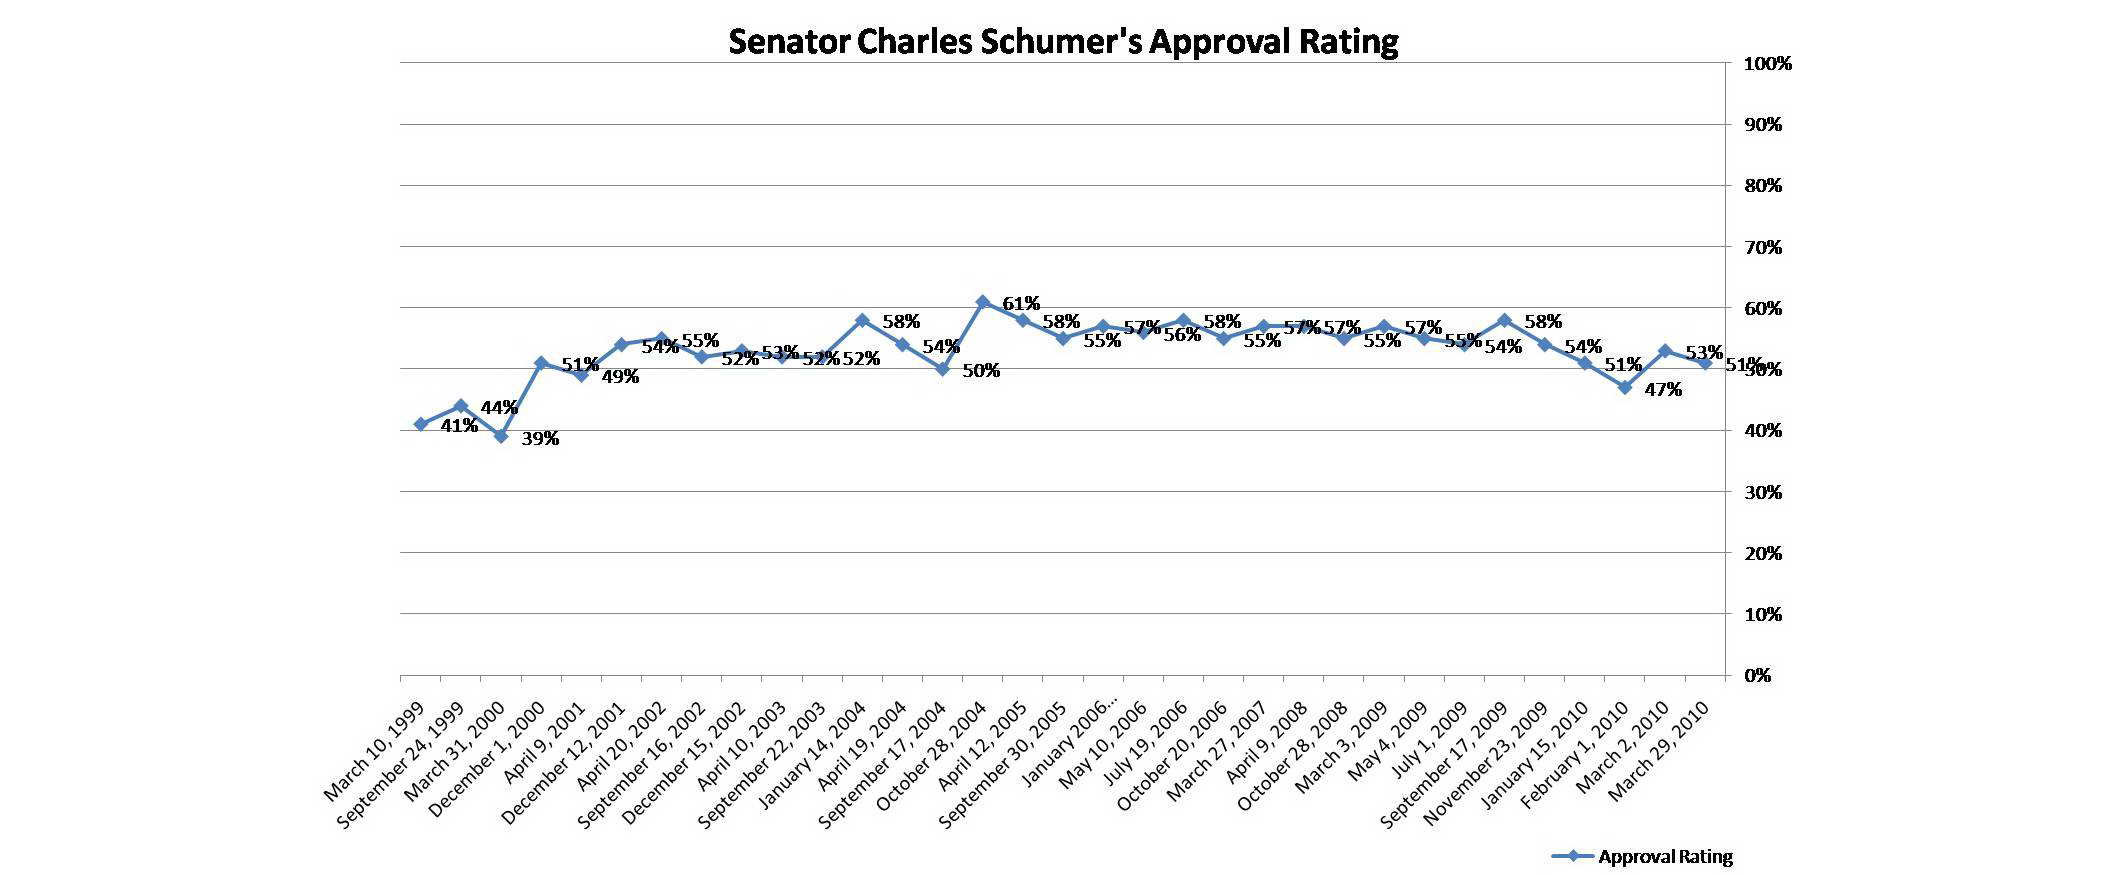 Trend graph: Schumer's approval rating over time.